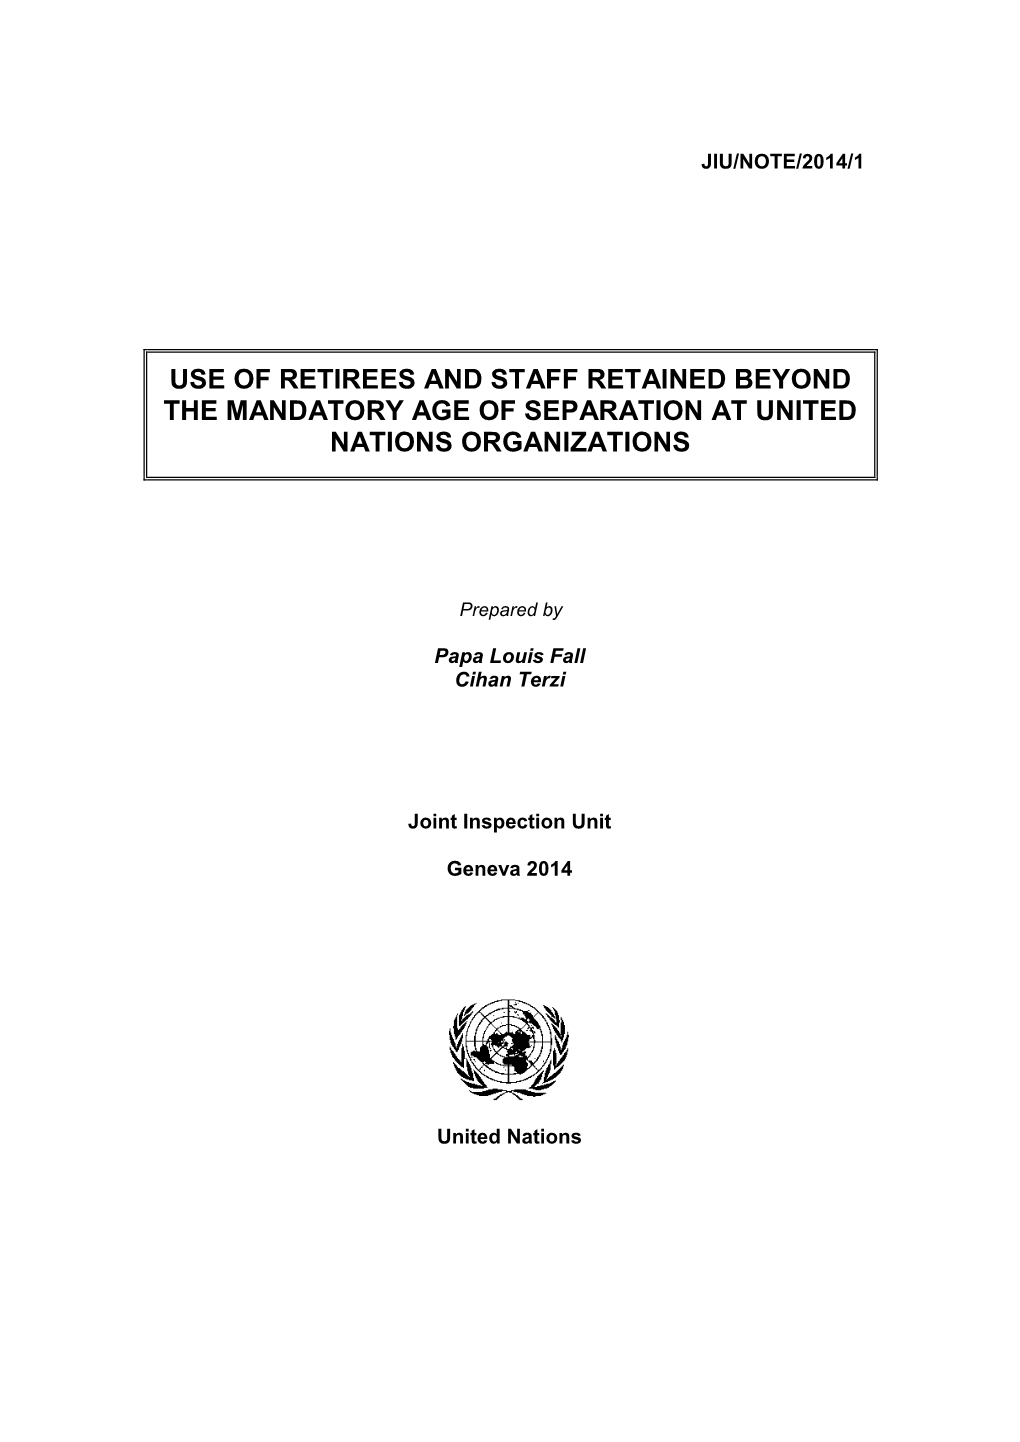 Use of Retirees and Staff Retained Beyond the Mandatory Age of Separation at United Nations Organizations